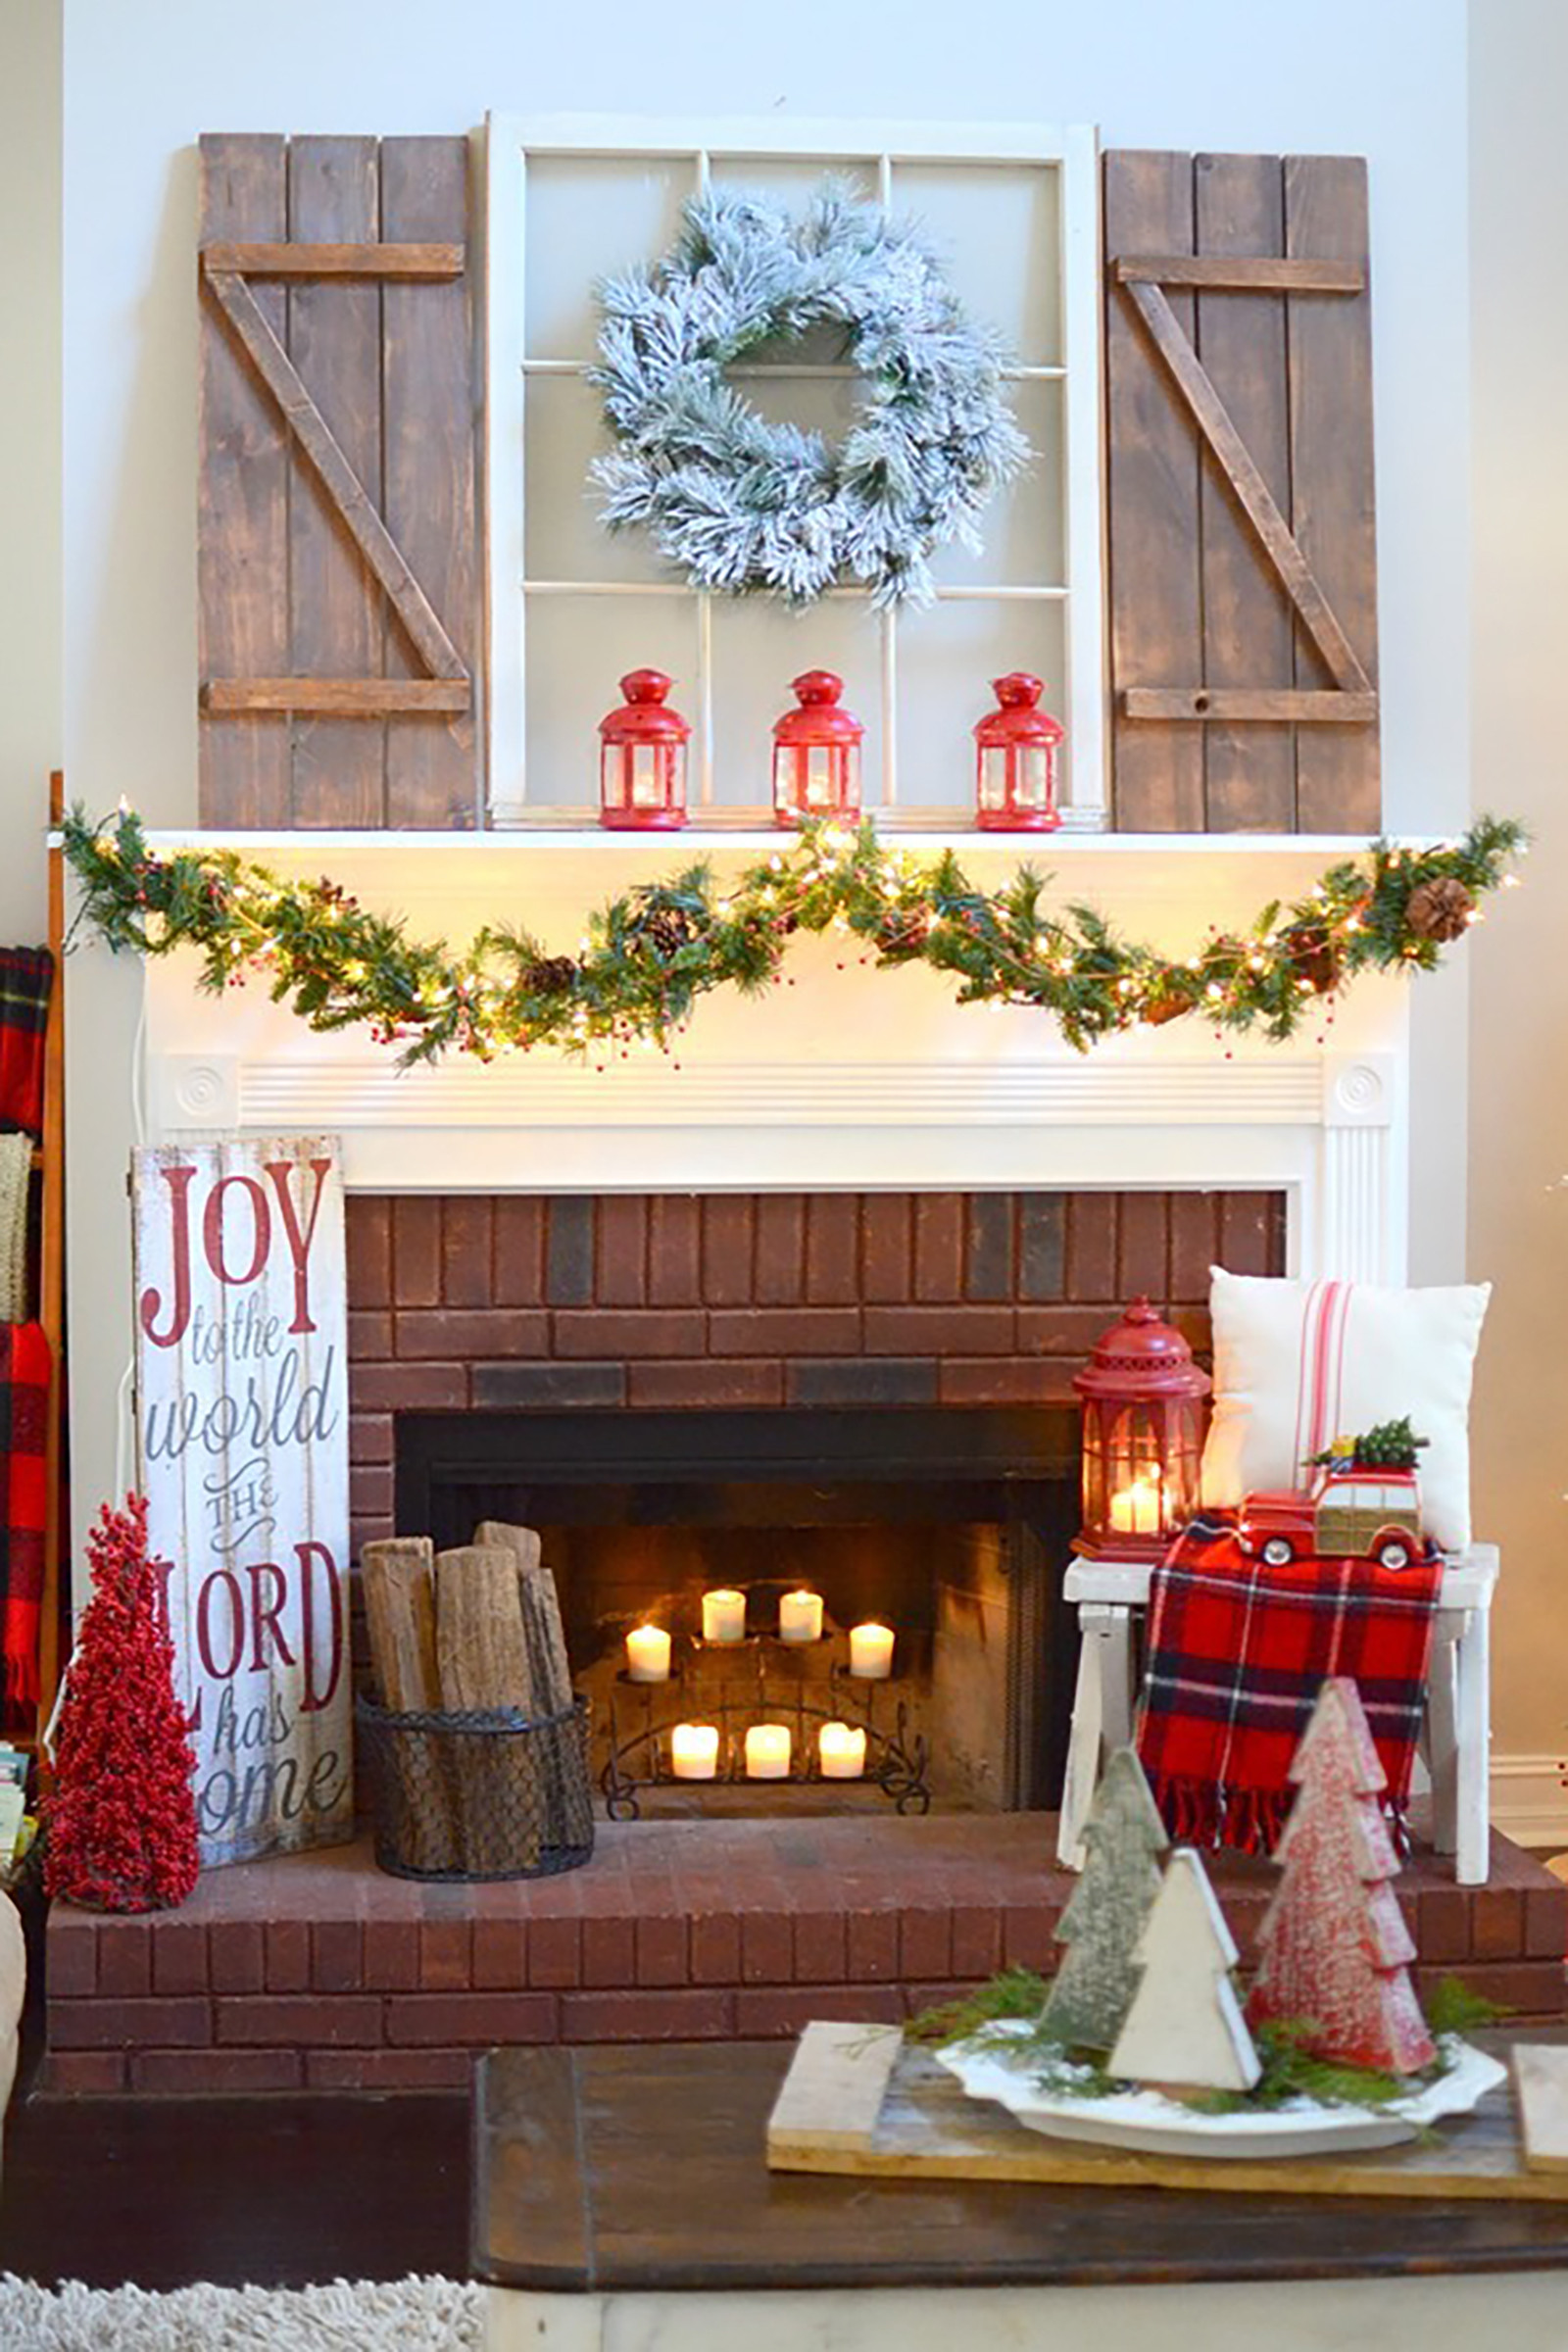 Christmas Decoration Fireplace Mantel
 35 Christmas Mantel Decorations Ideas for Holiday